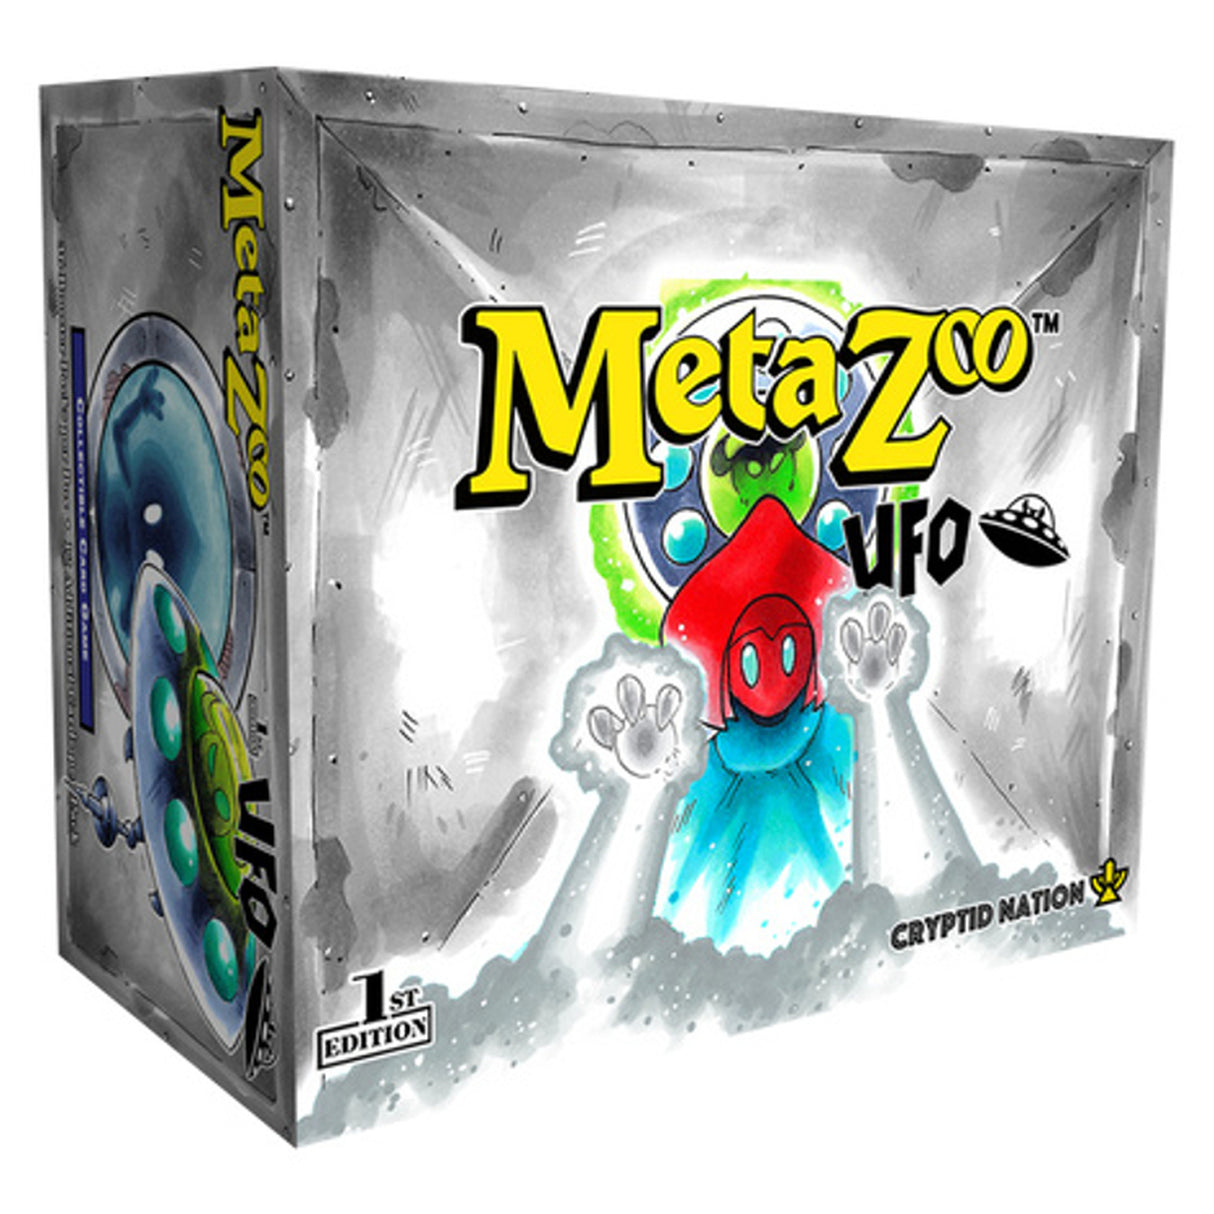 MetaZoo UFO First Edition Booster Box [PREORDER] - PCA Designer Toys